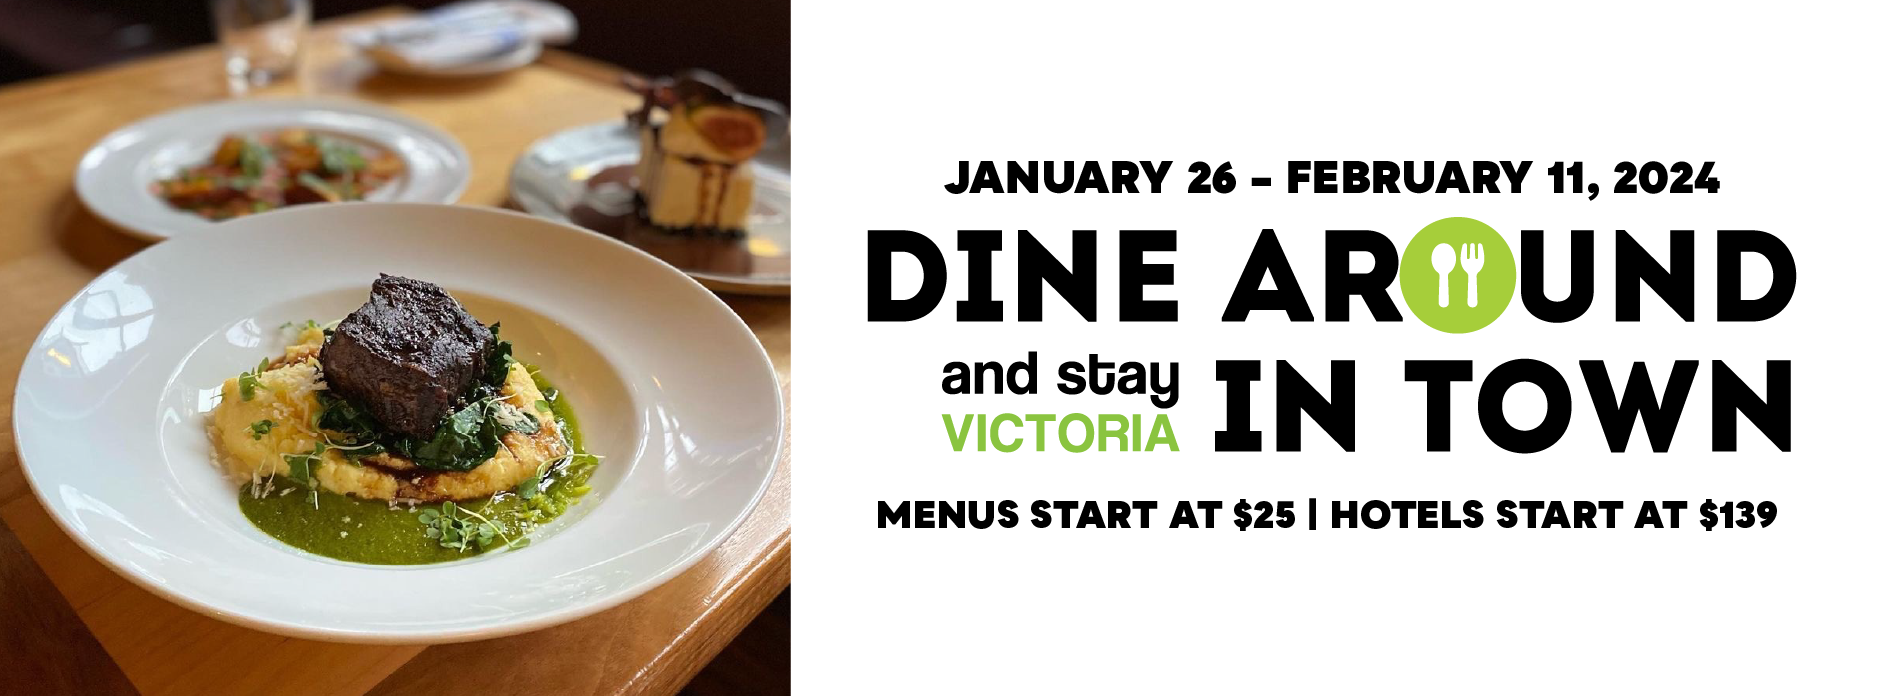 Dine Around and Stay in Town 2024 DVBA